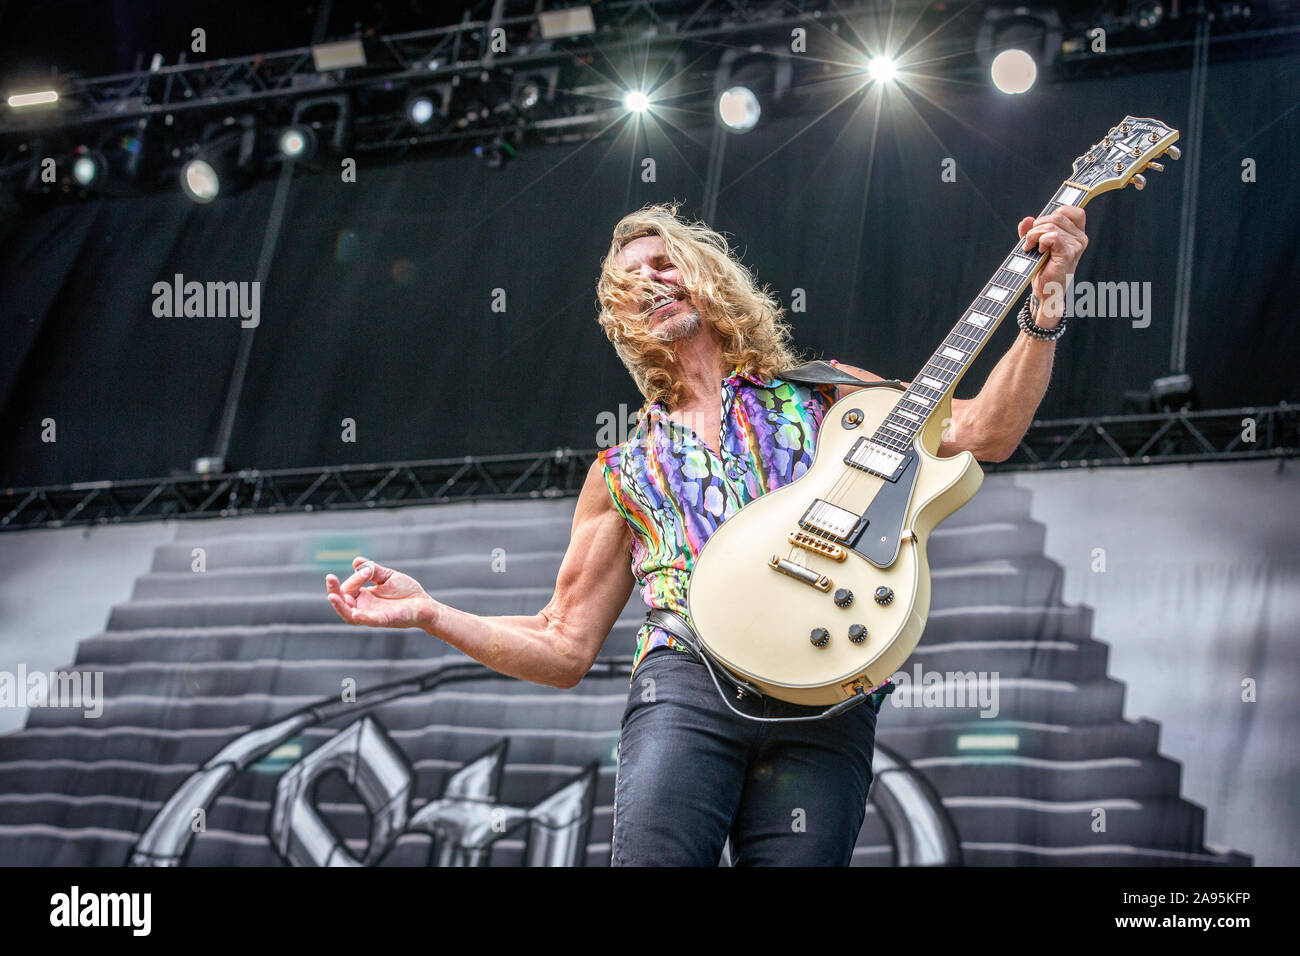 Solvesborg, Sweden. 08th, June 2019. The American rock band Styx performs a live concert during the Swedish music festival Sweden Rock Festival 2019. Here guitarist Tommy Shaw is seen live on stage. (Photo credit: Gonzales Photo - Terje Dokken). Stock Photo